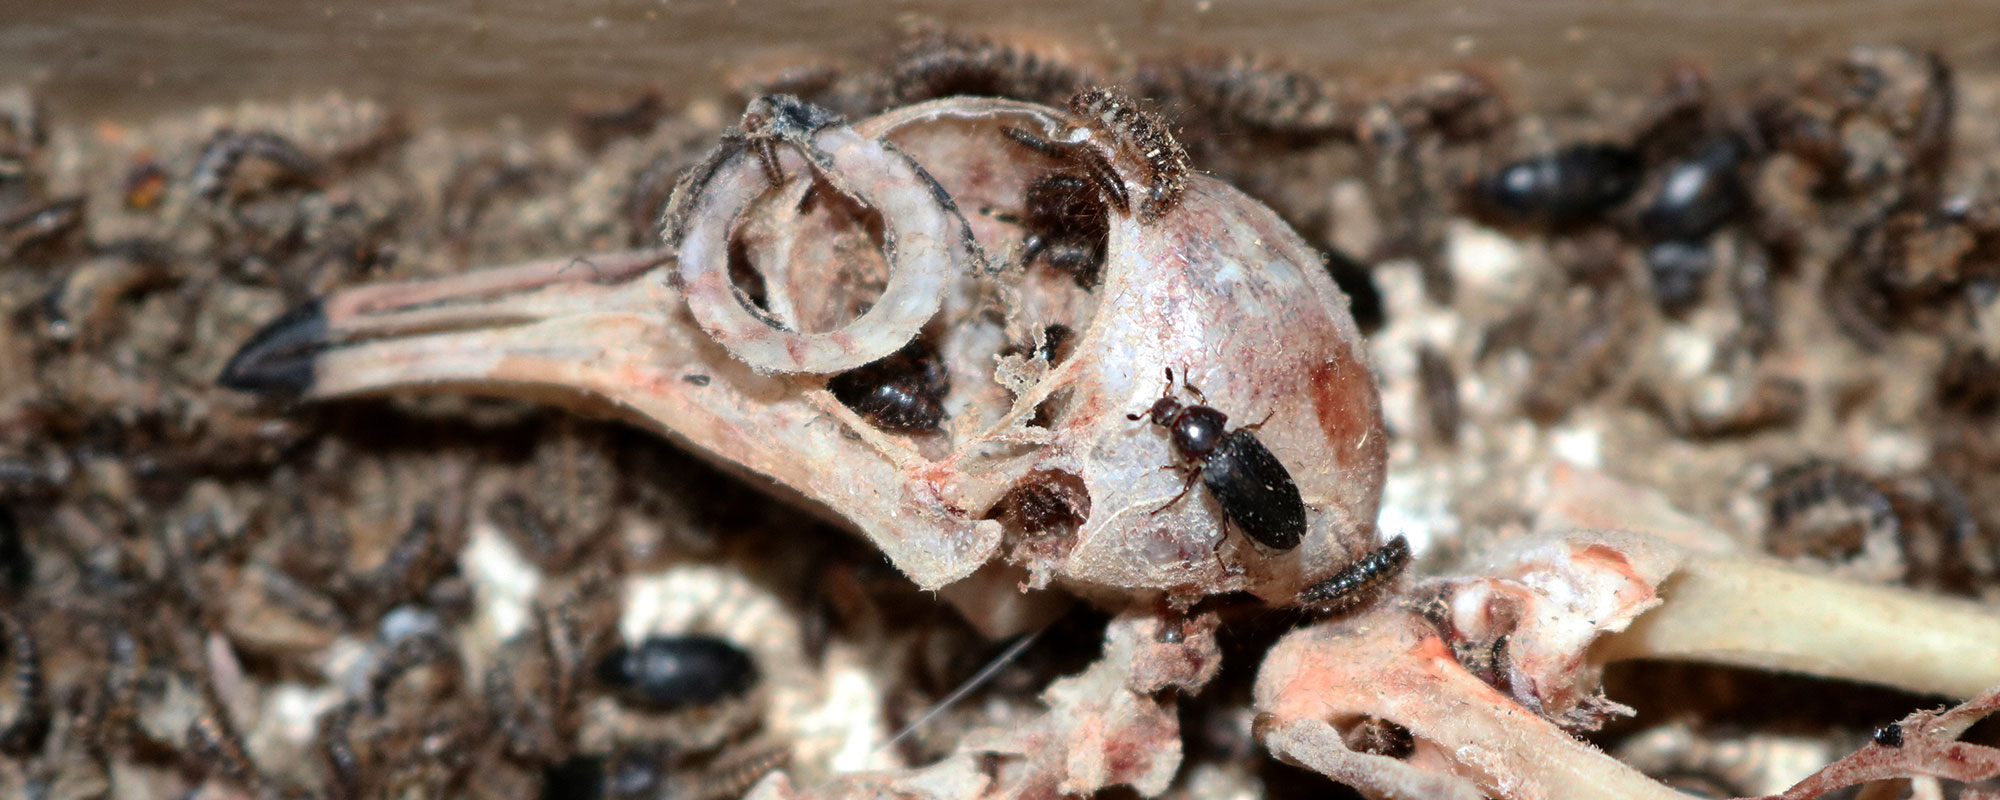 flesh-eating beetles crawling on the skeletal remains of a pidgeon.